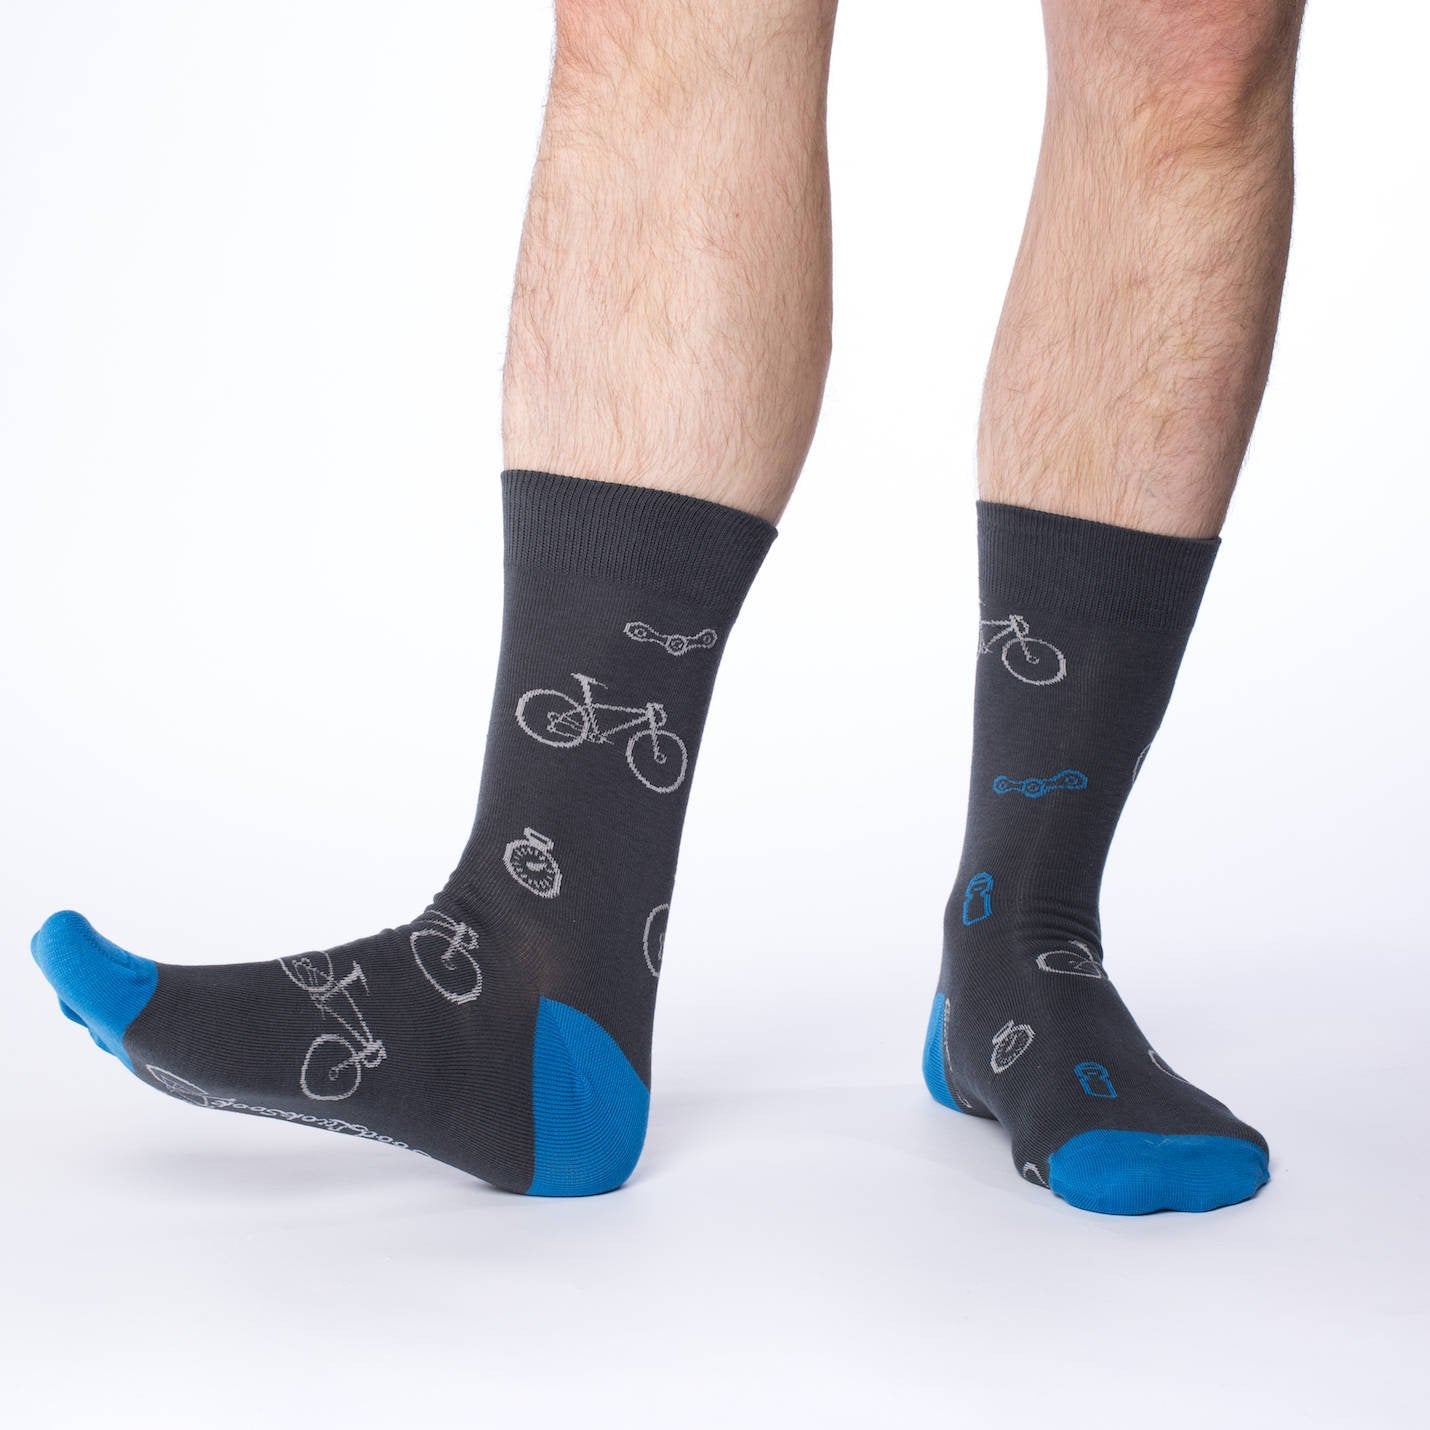 Good Luck Sock - Grey & Blue Bicycles